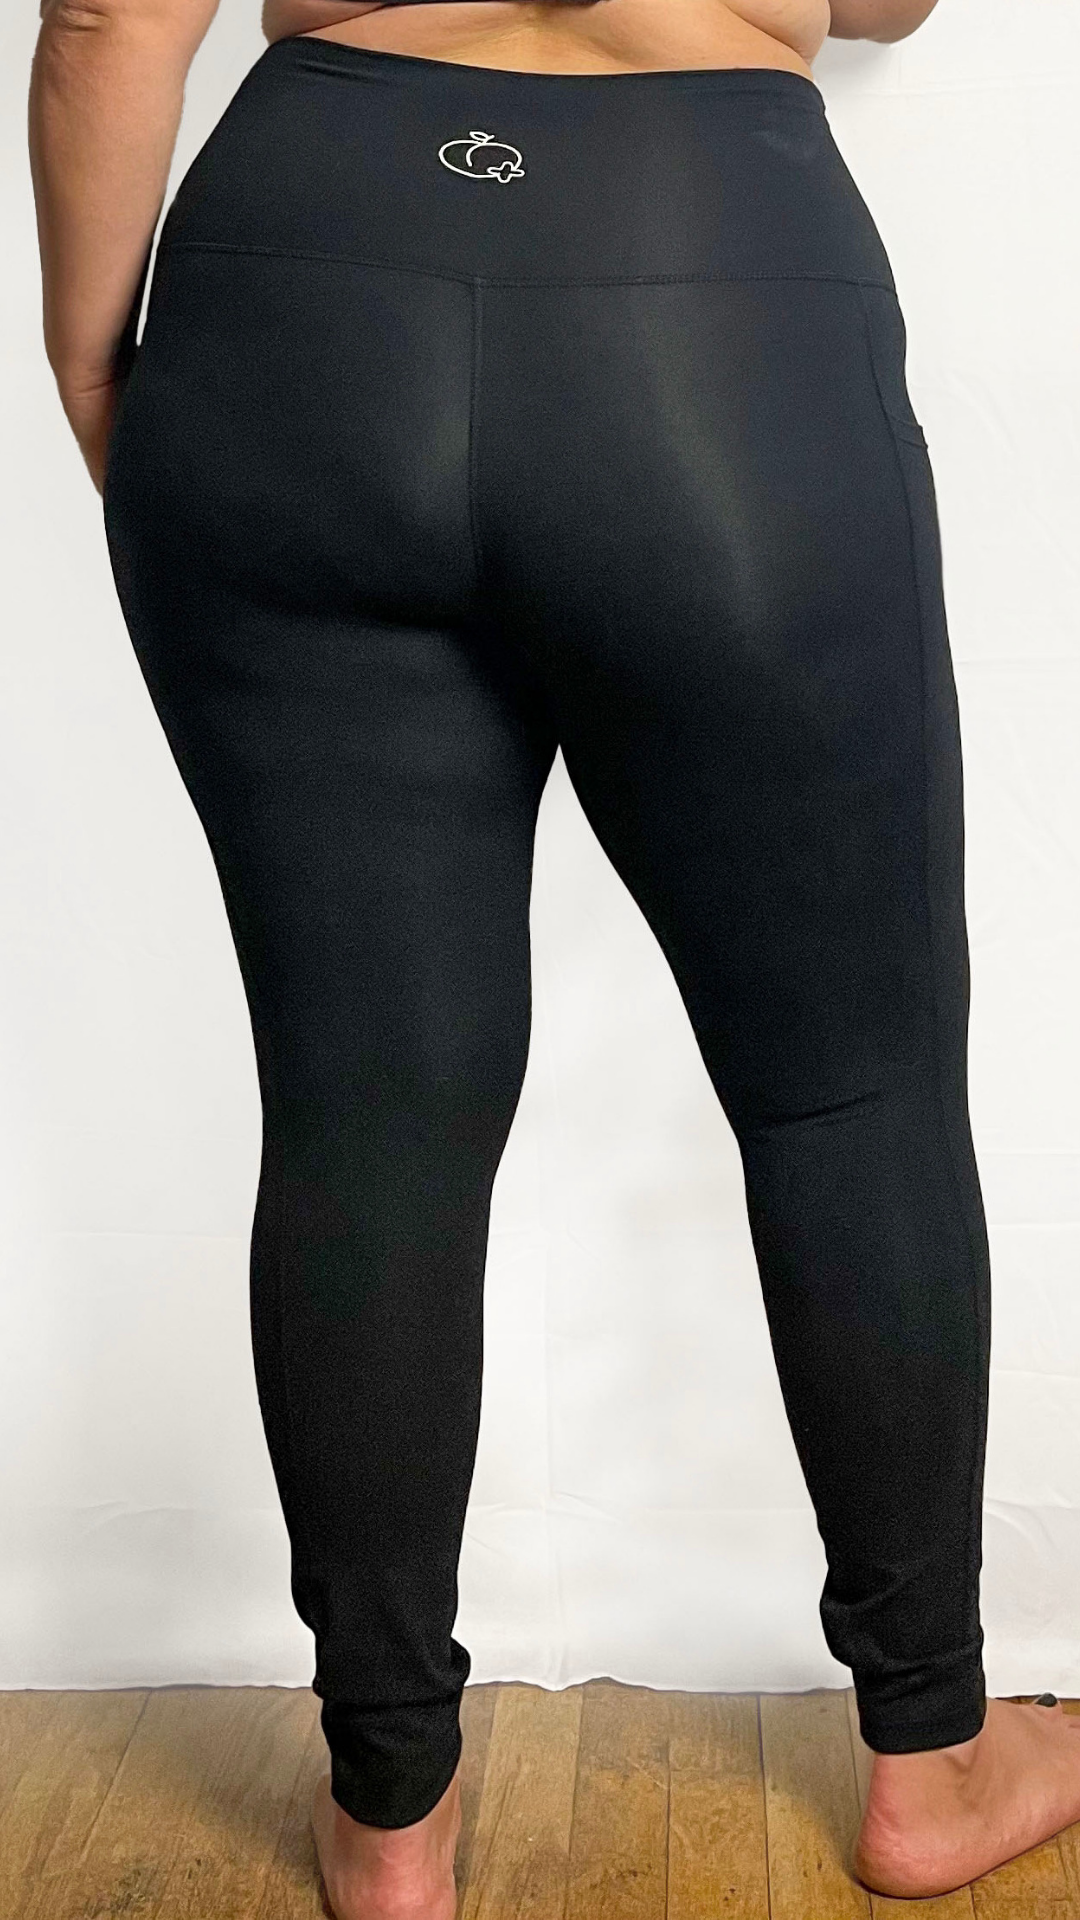 Women's Plus Size 1 Waistband Solid Peach Skin Leggings. - 1 Elastic  Waistband - Full-Length - Inseam approximately 28 - One size fits most  plus 16-20 - 92% Polyester / 8% Spandex, 7300939